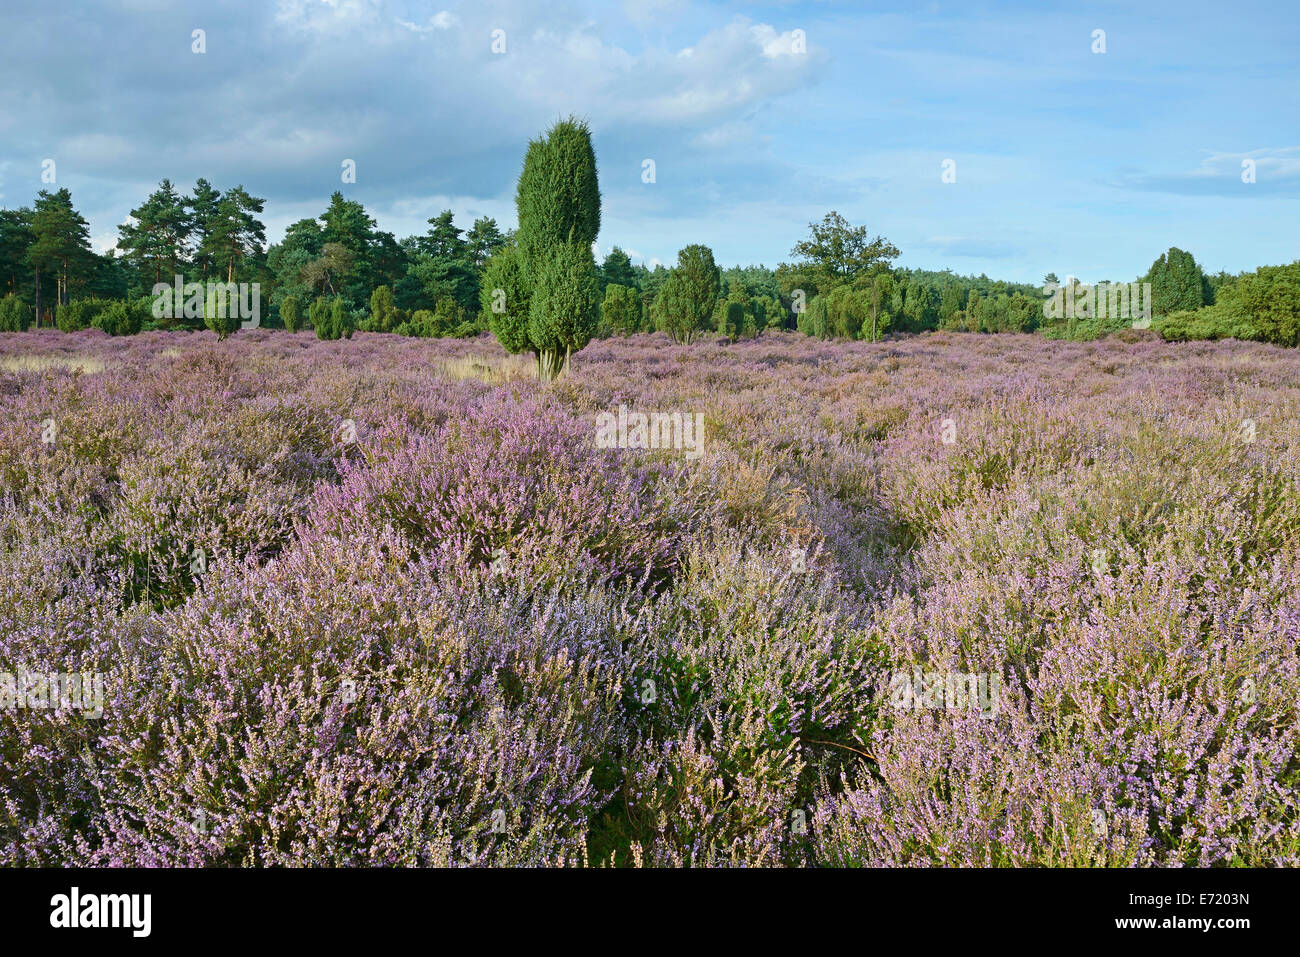 Heather in bloom in a juniper grove, Emsland, Lower Saxony, Germany Stock Photo